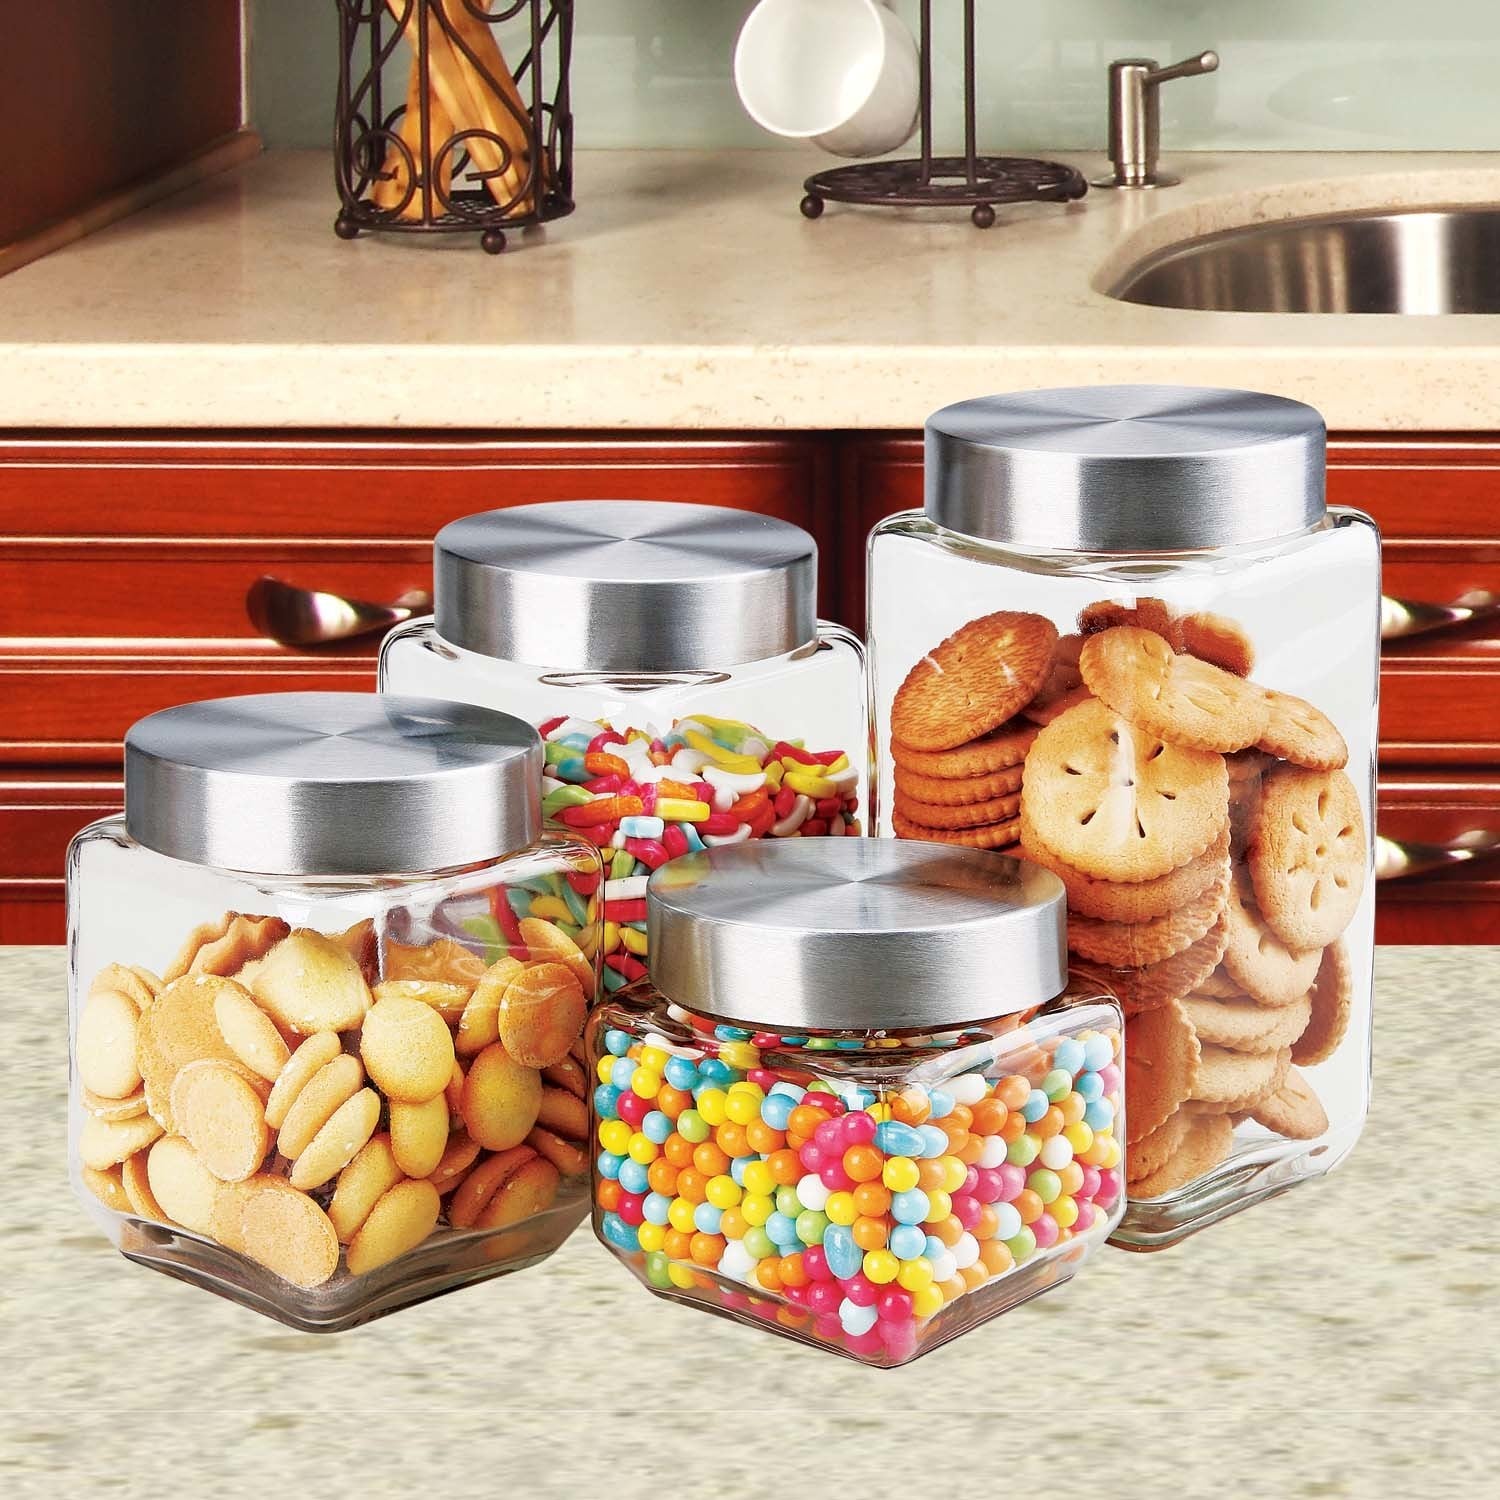 https://ak1.ostkcdn.com/images/products/11884050/Home-Basics-Clear-Glass-Canisters-with-Airtight-Lids-Pack-of-4-f590f8ba-a0d3-41de-8056-10e00fe0e35f.jpg